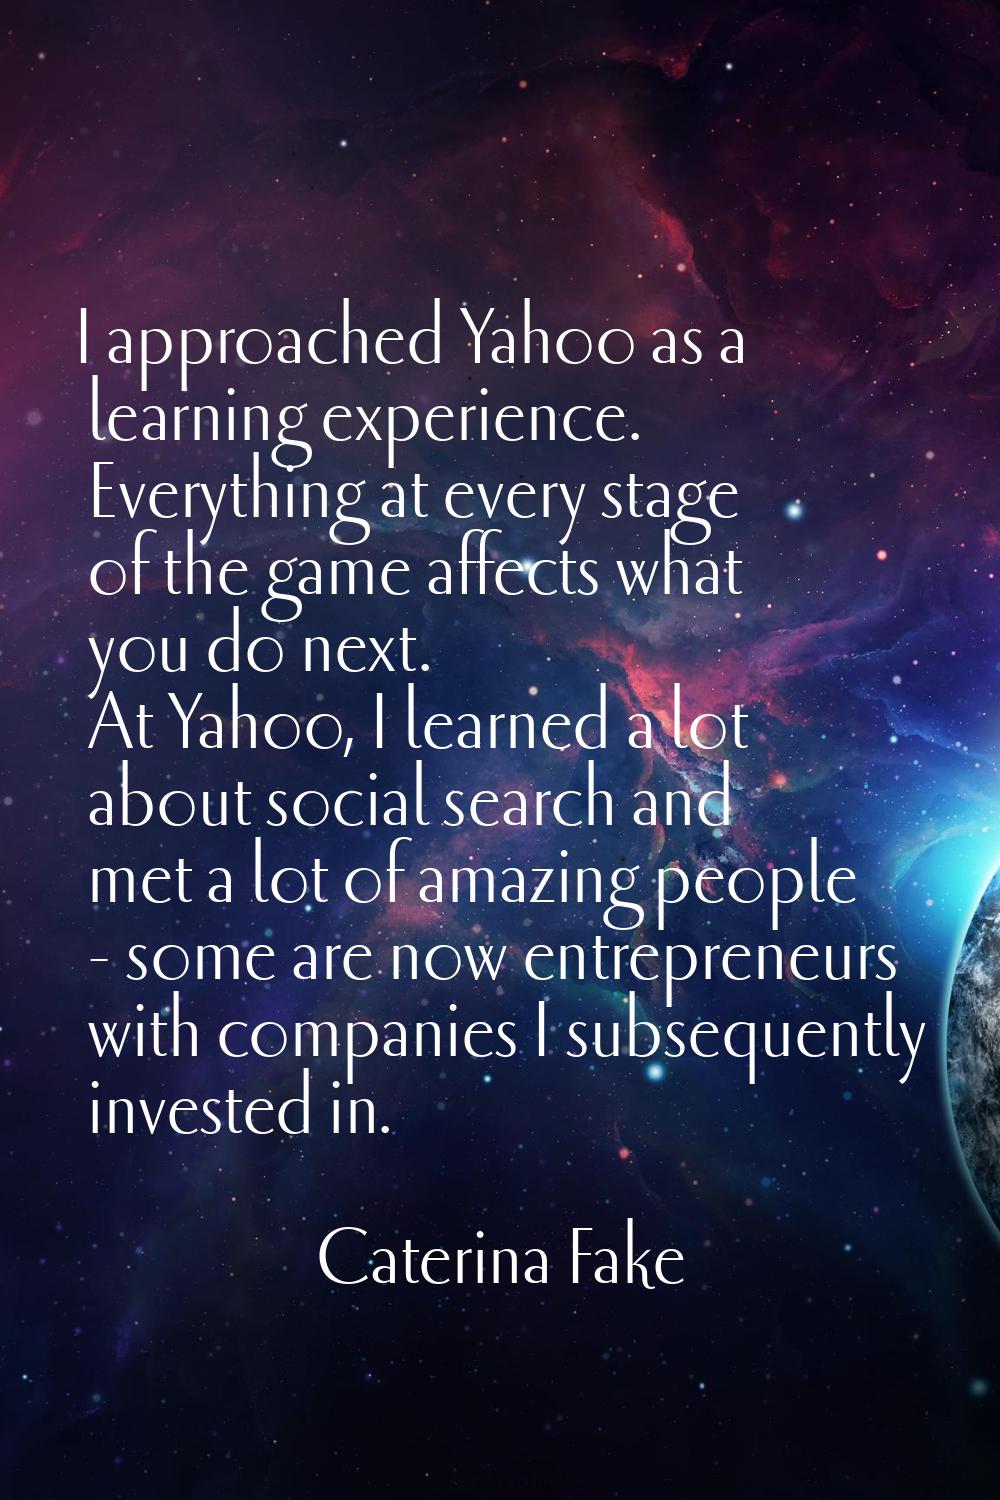 I approached Yahoo as a learning experience. Everything at every stage of the game affects what you